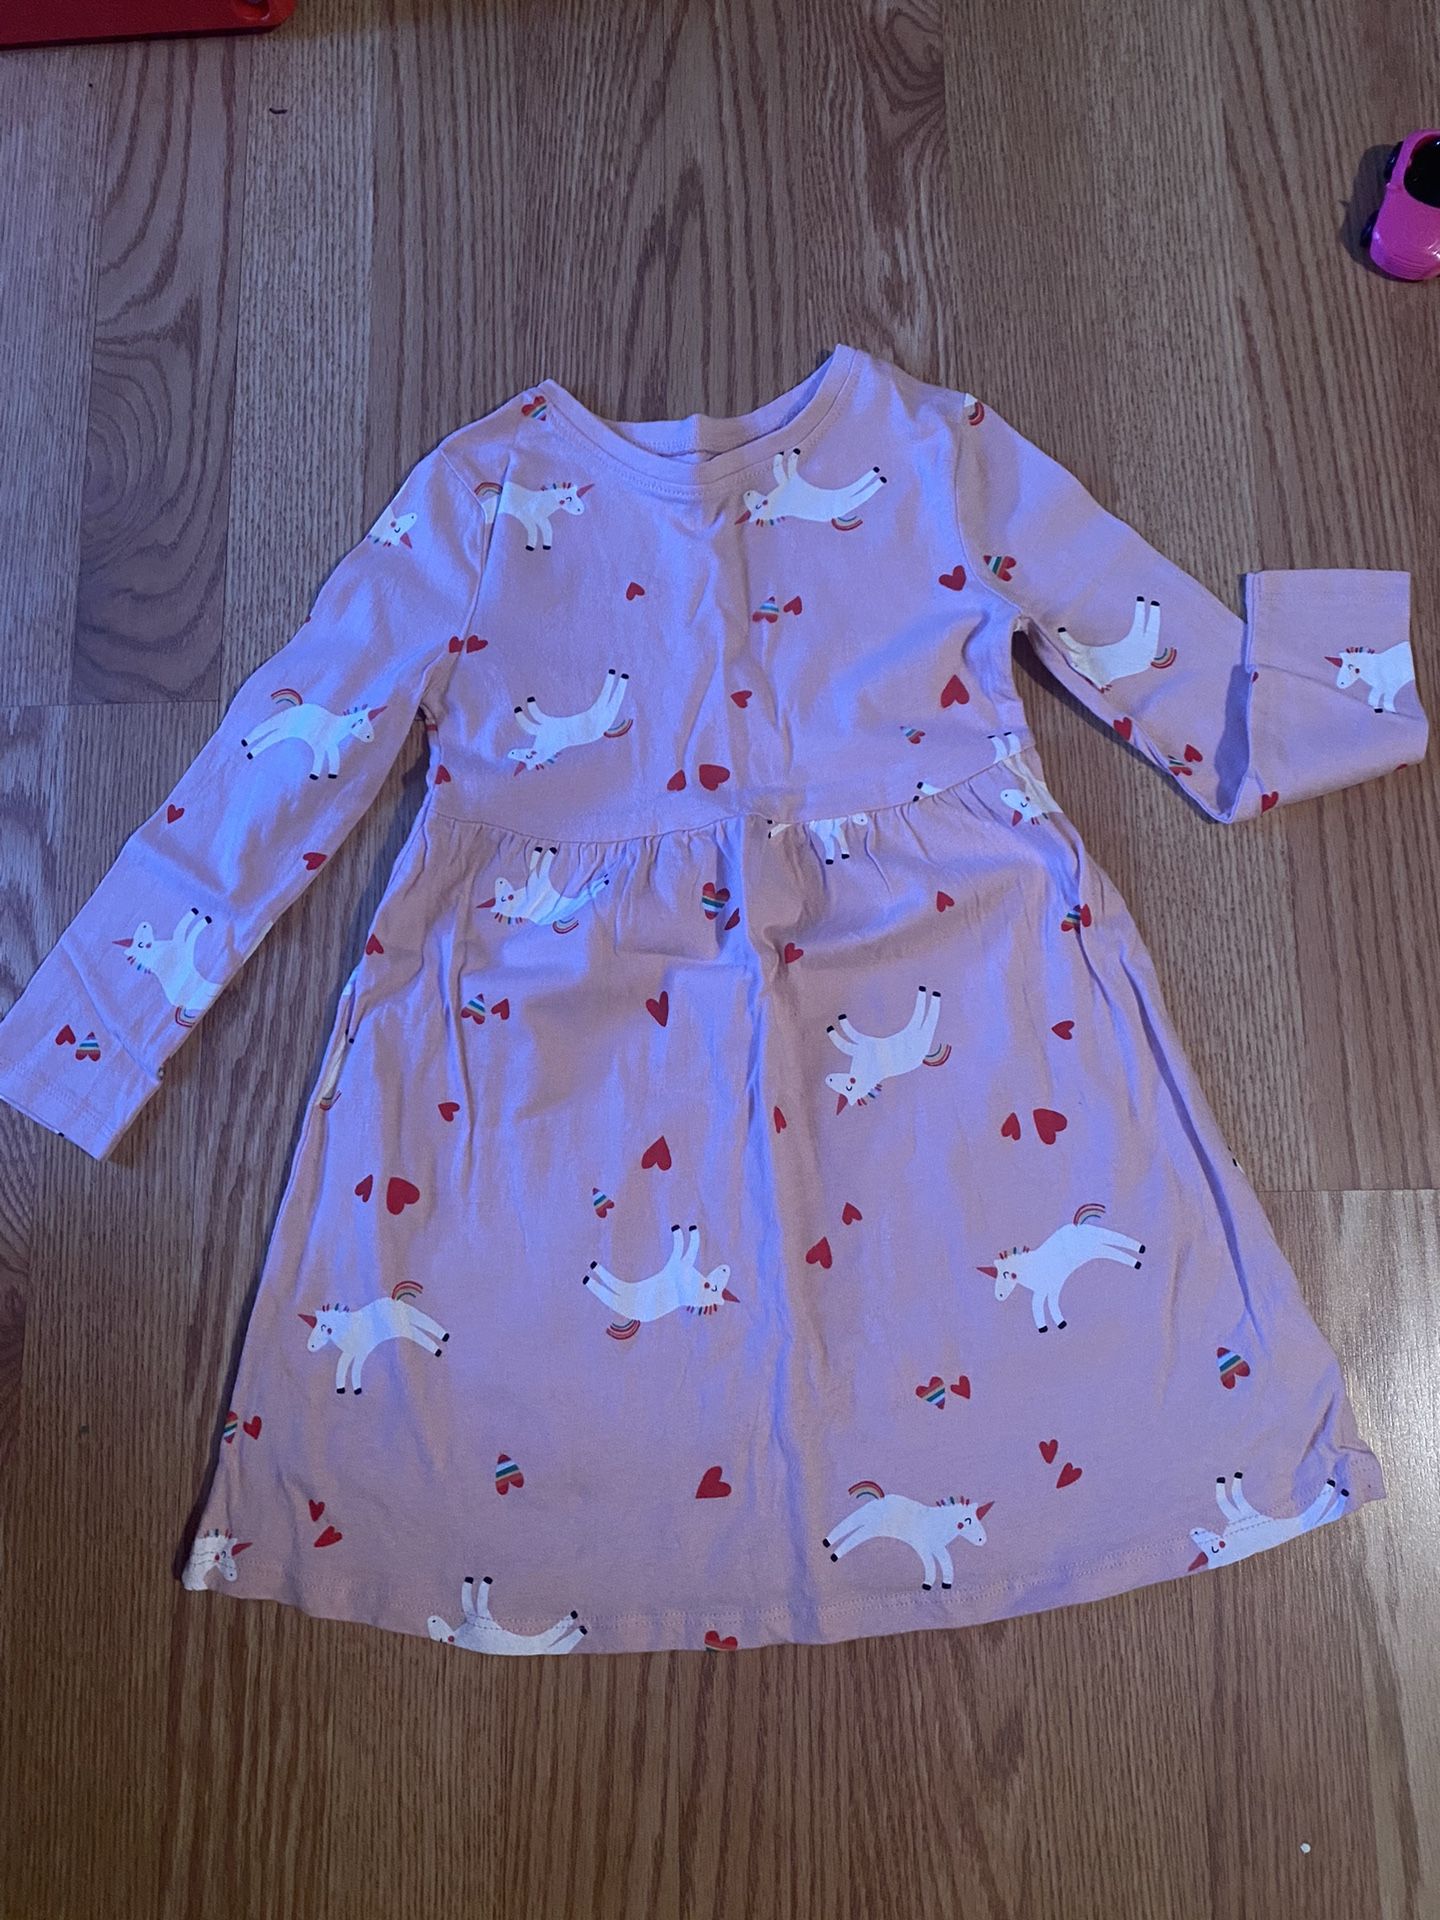 Toddler Girl Size 3T Valentine’s Dress And Pajamas  